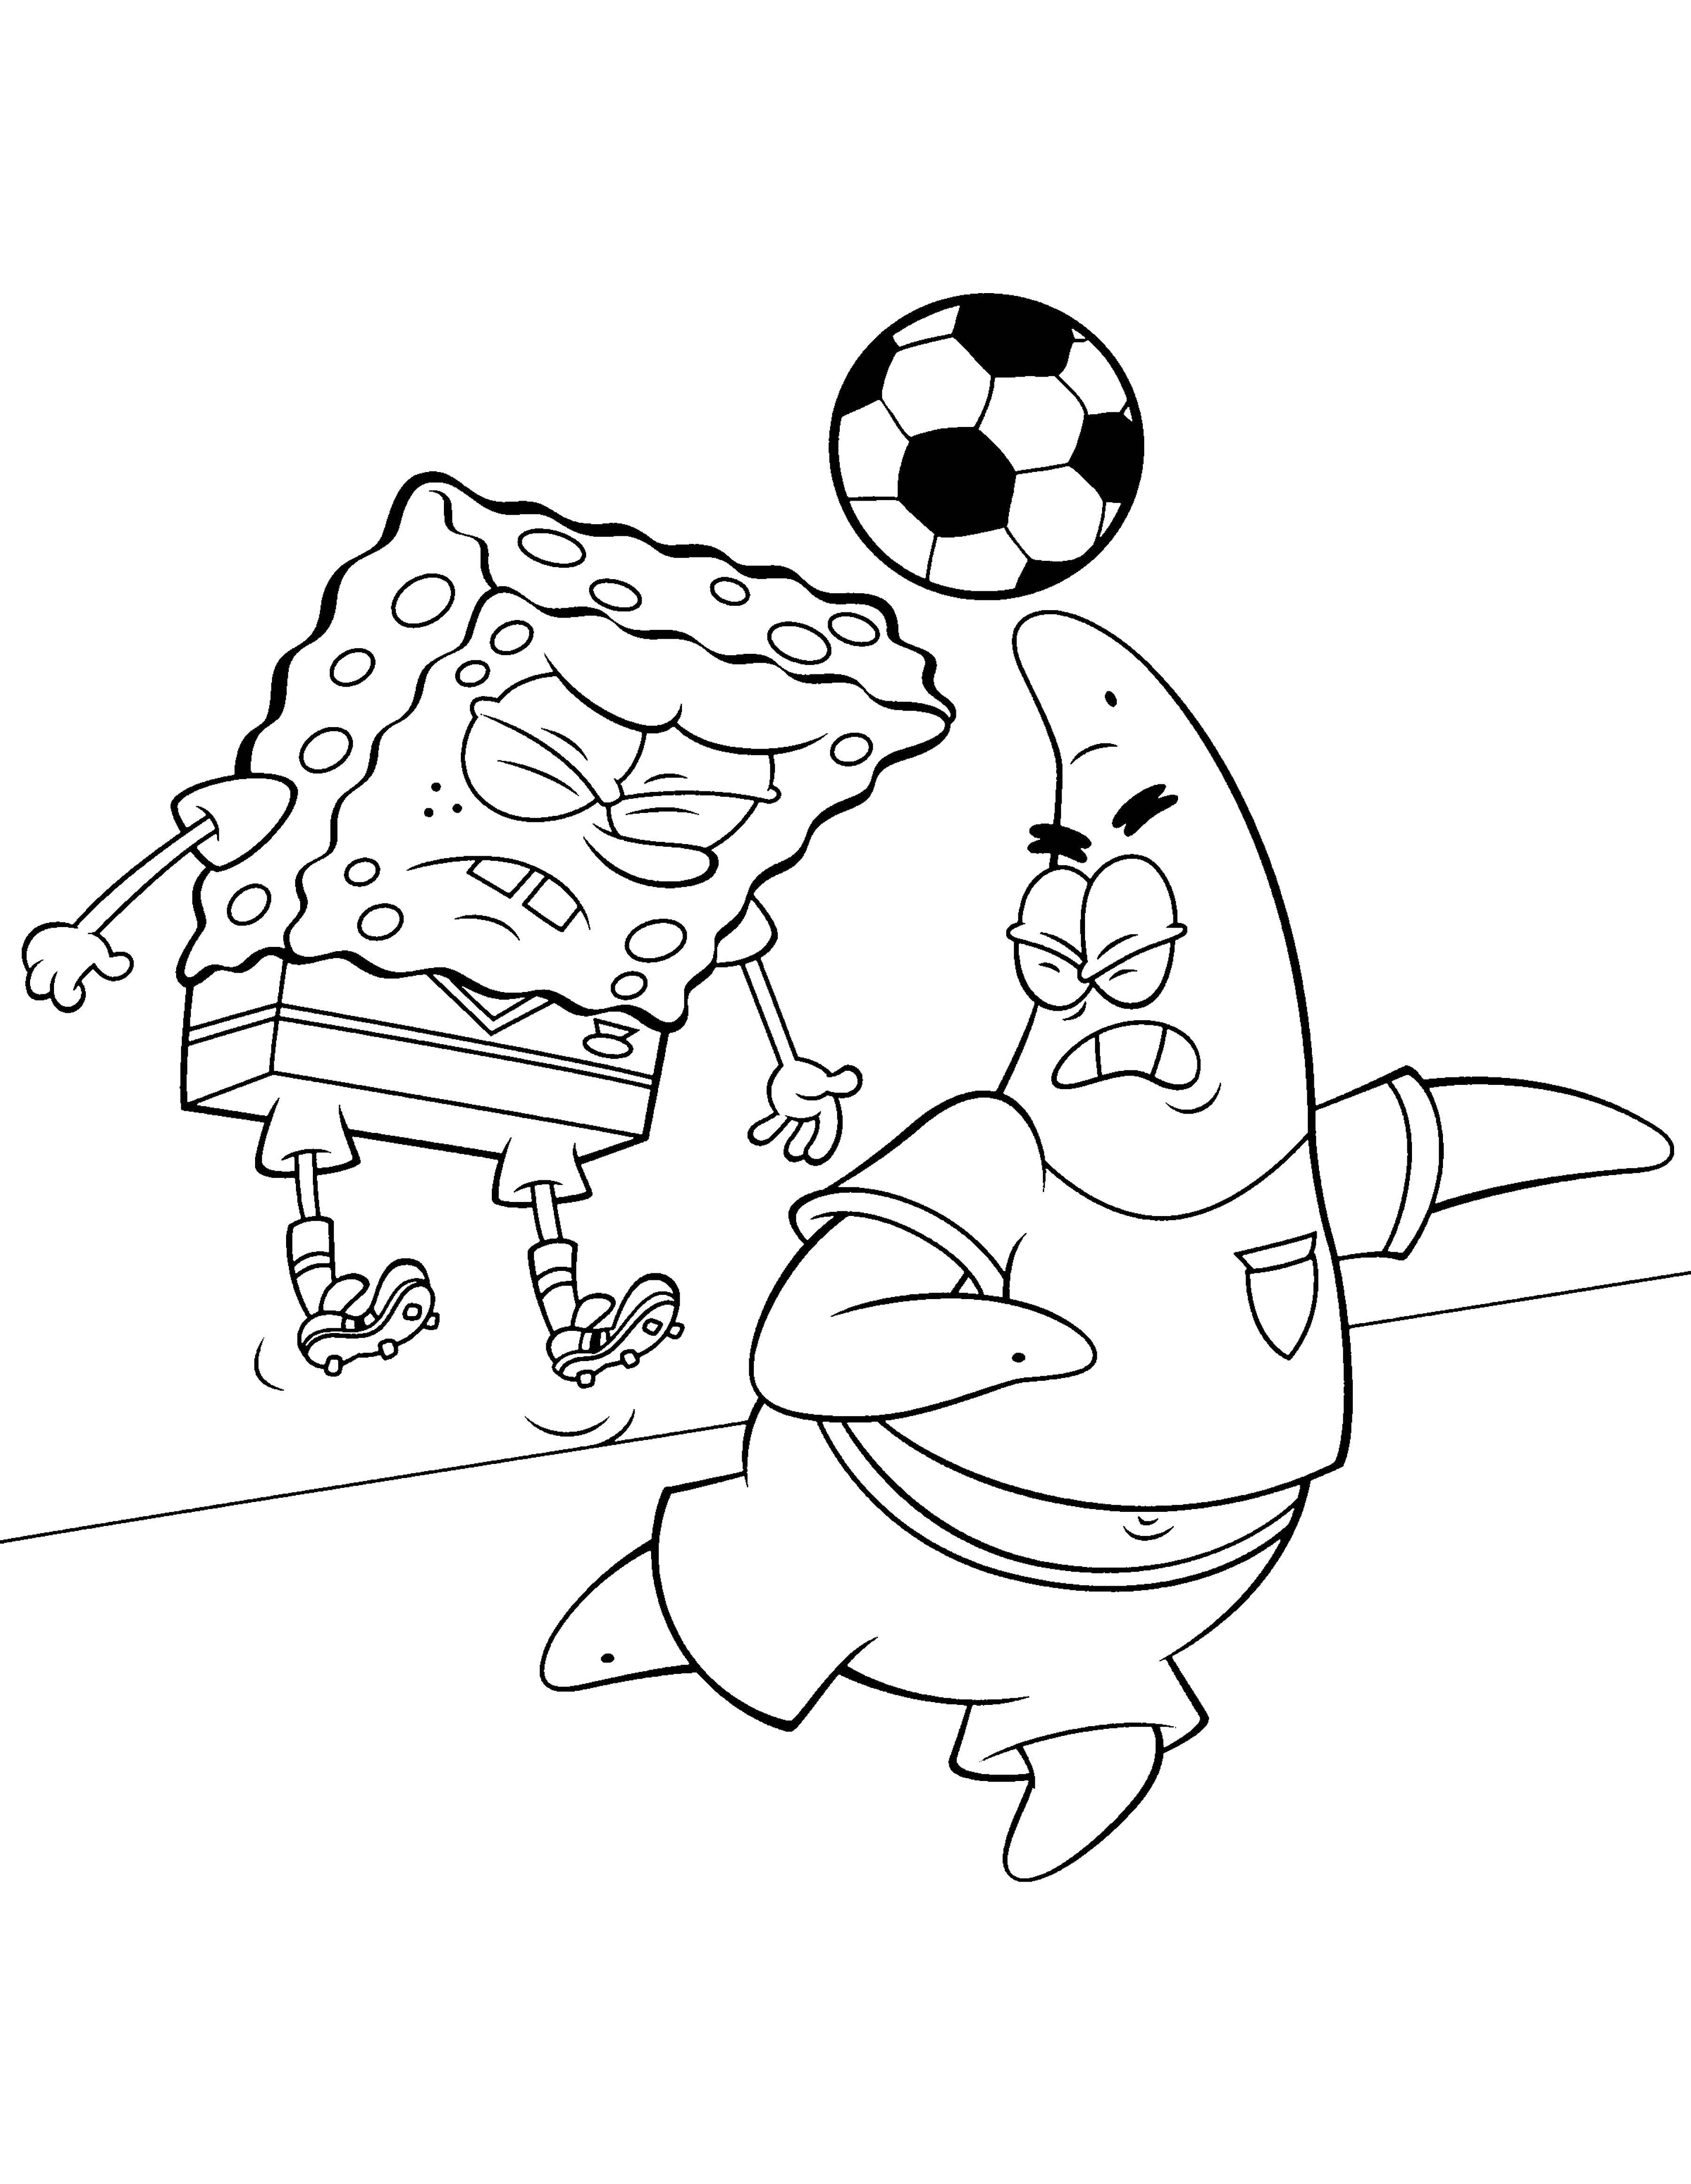 Coloring Game shibal. Category Sports. Tags:  Sports, soccer, ball, game.